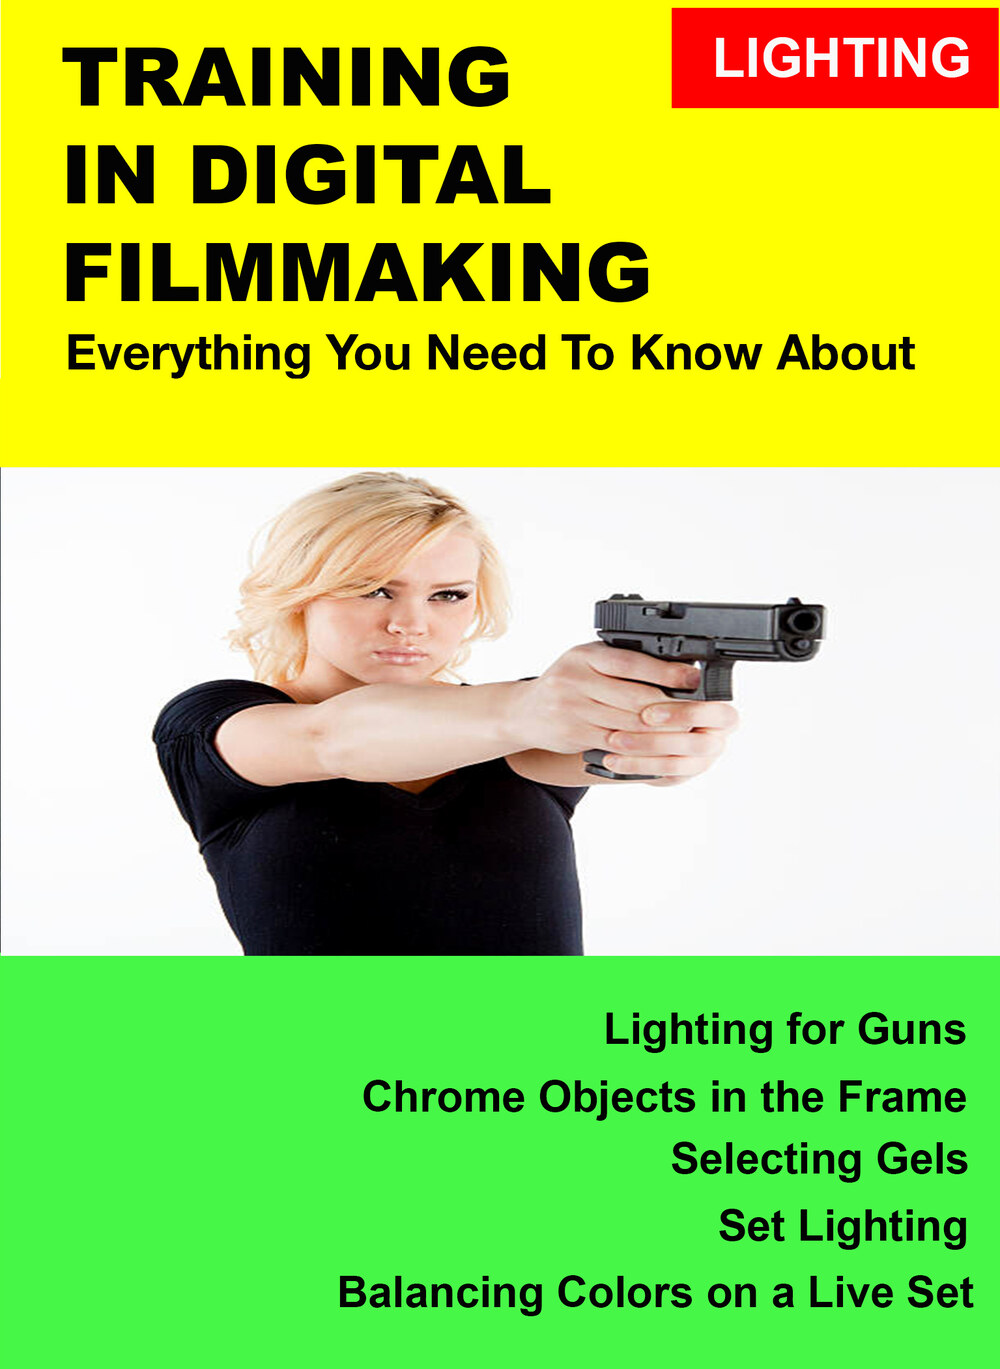 F3013 - Everything you Need to Know About Lighting on a Set - Guns & Chrome Objects in the Frame